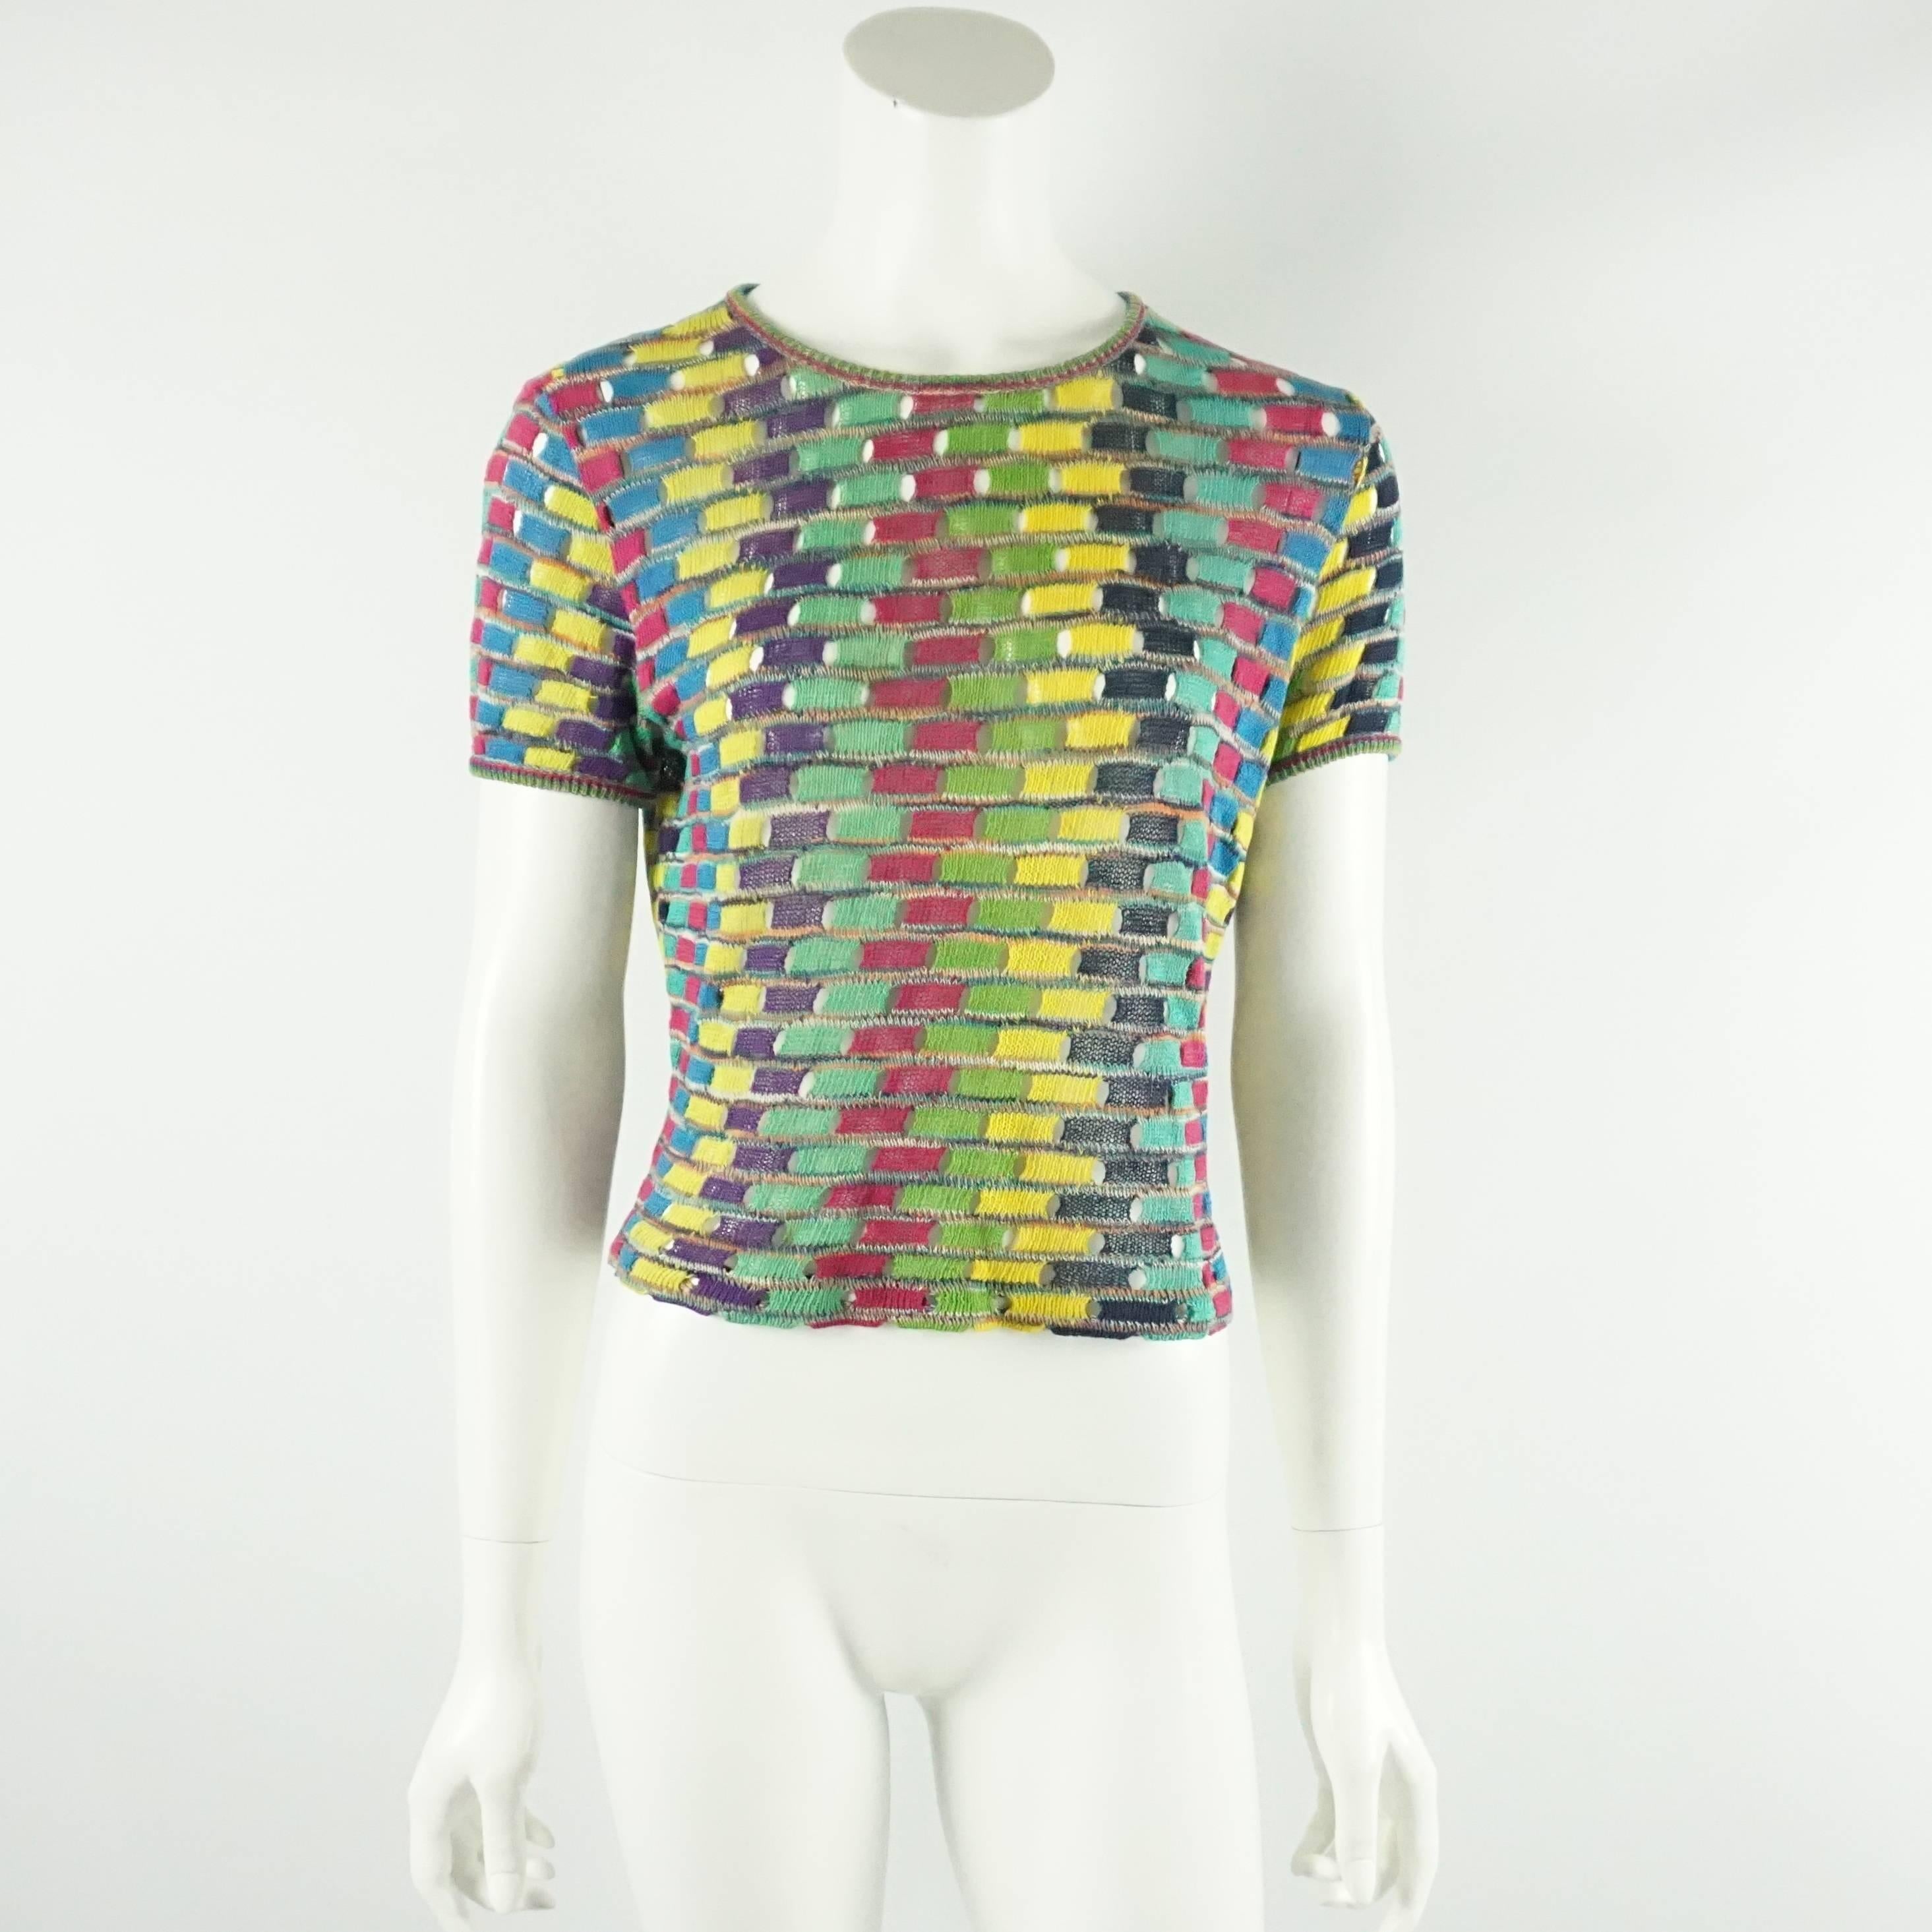 This vintage Missoni sweater set has a multi colored pattern on both the top and the sweater. The sweater has long sleeves and clear lucite buttons. The top has short sleeves and a rounded neckline. Both pieces are in excellent vintage